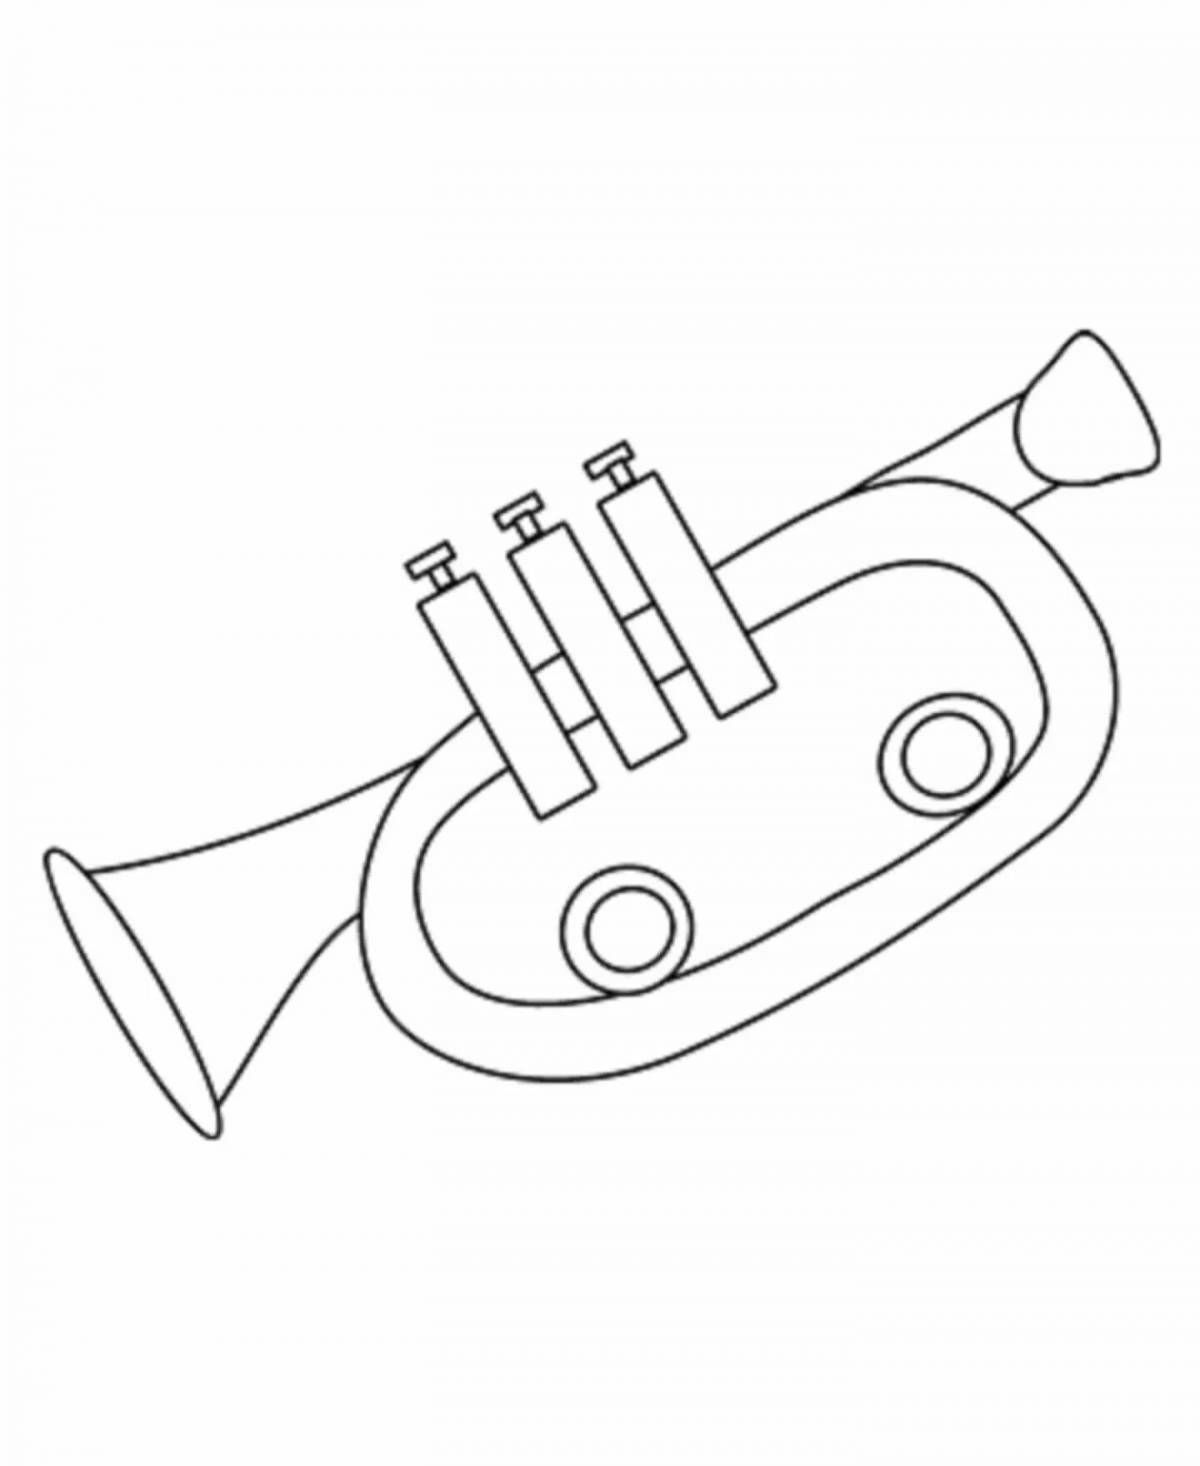 Beautiful trumpet coloring page for students